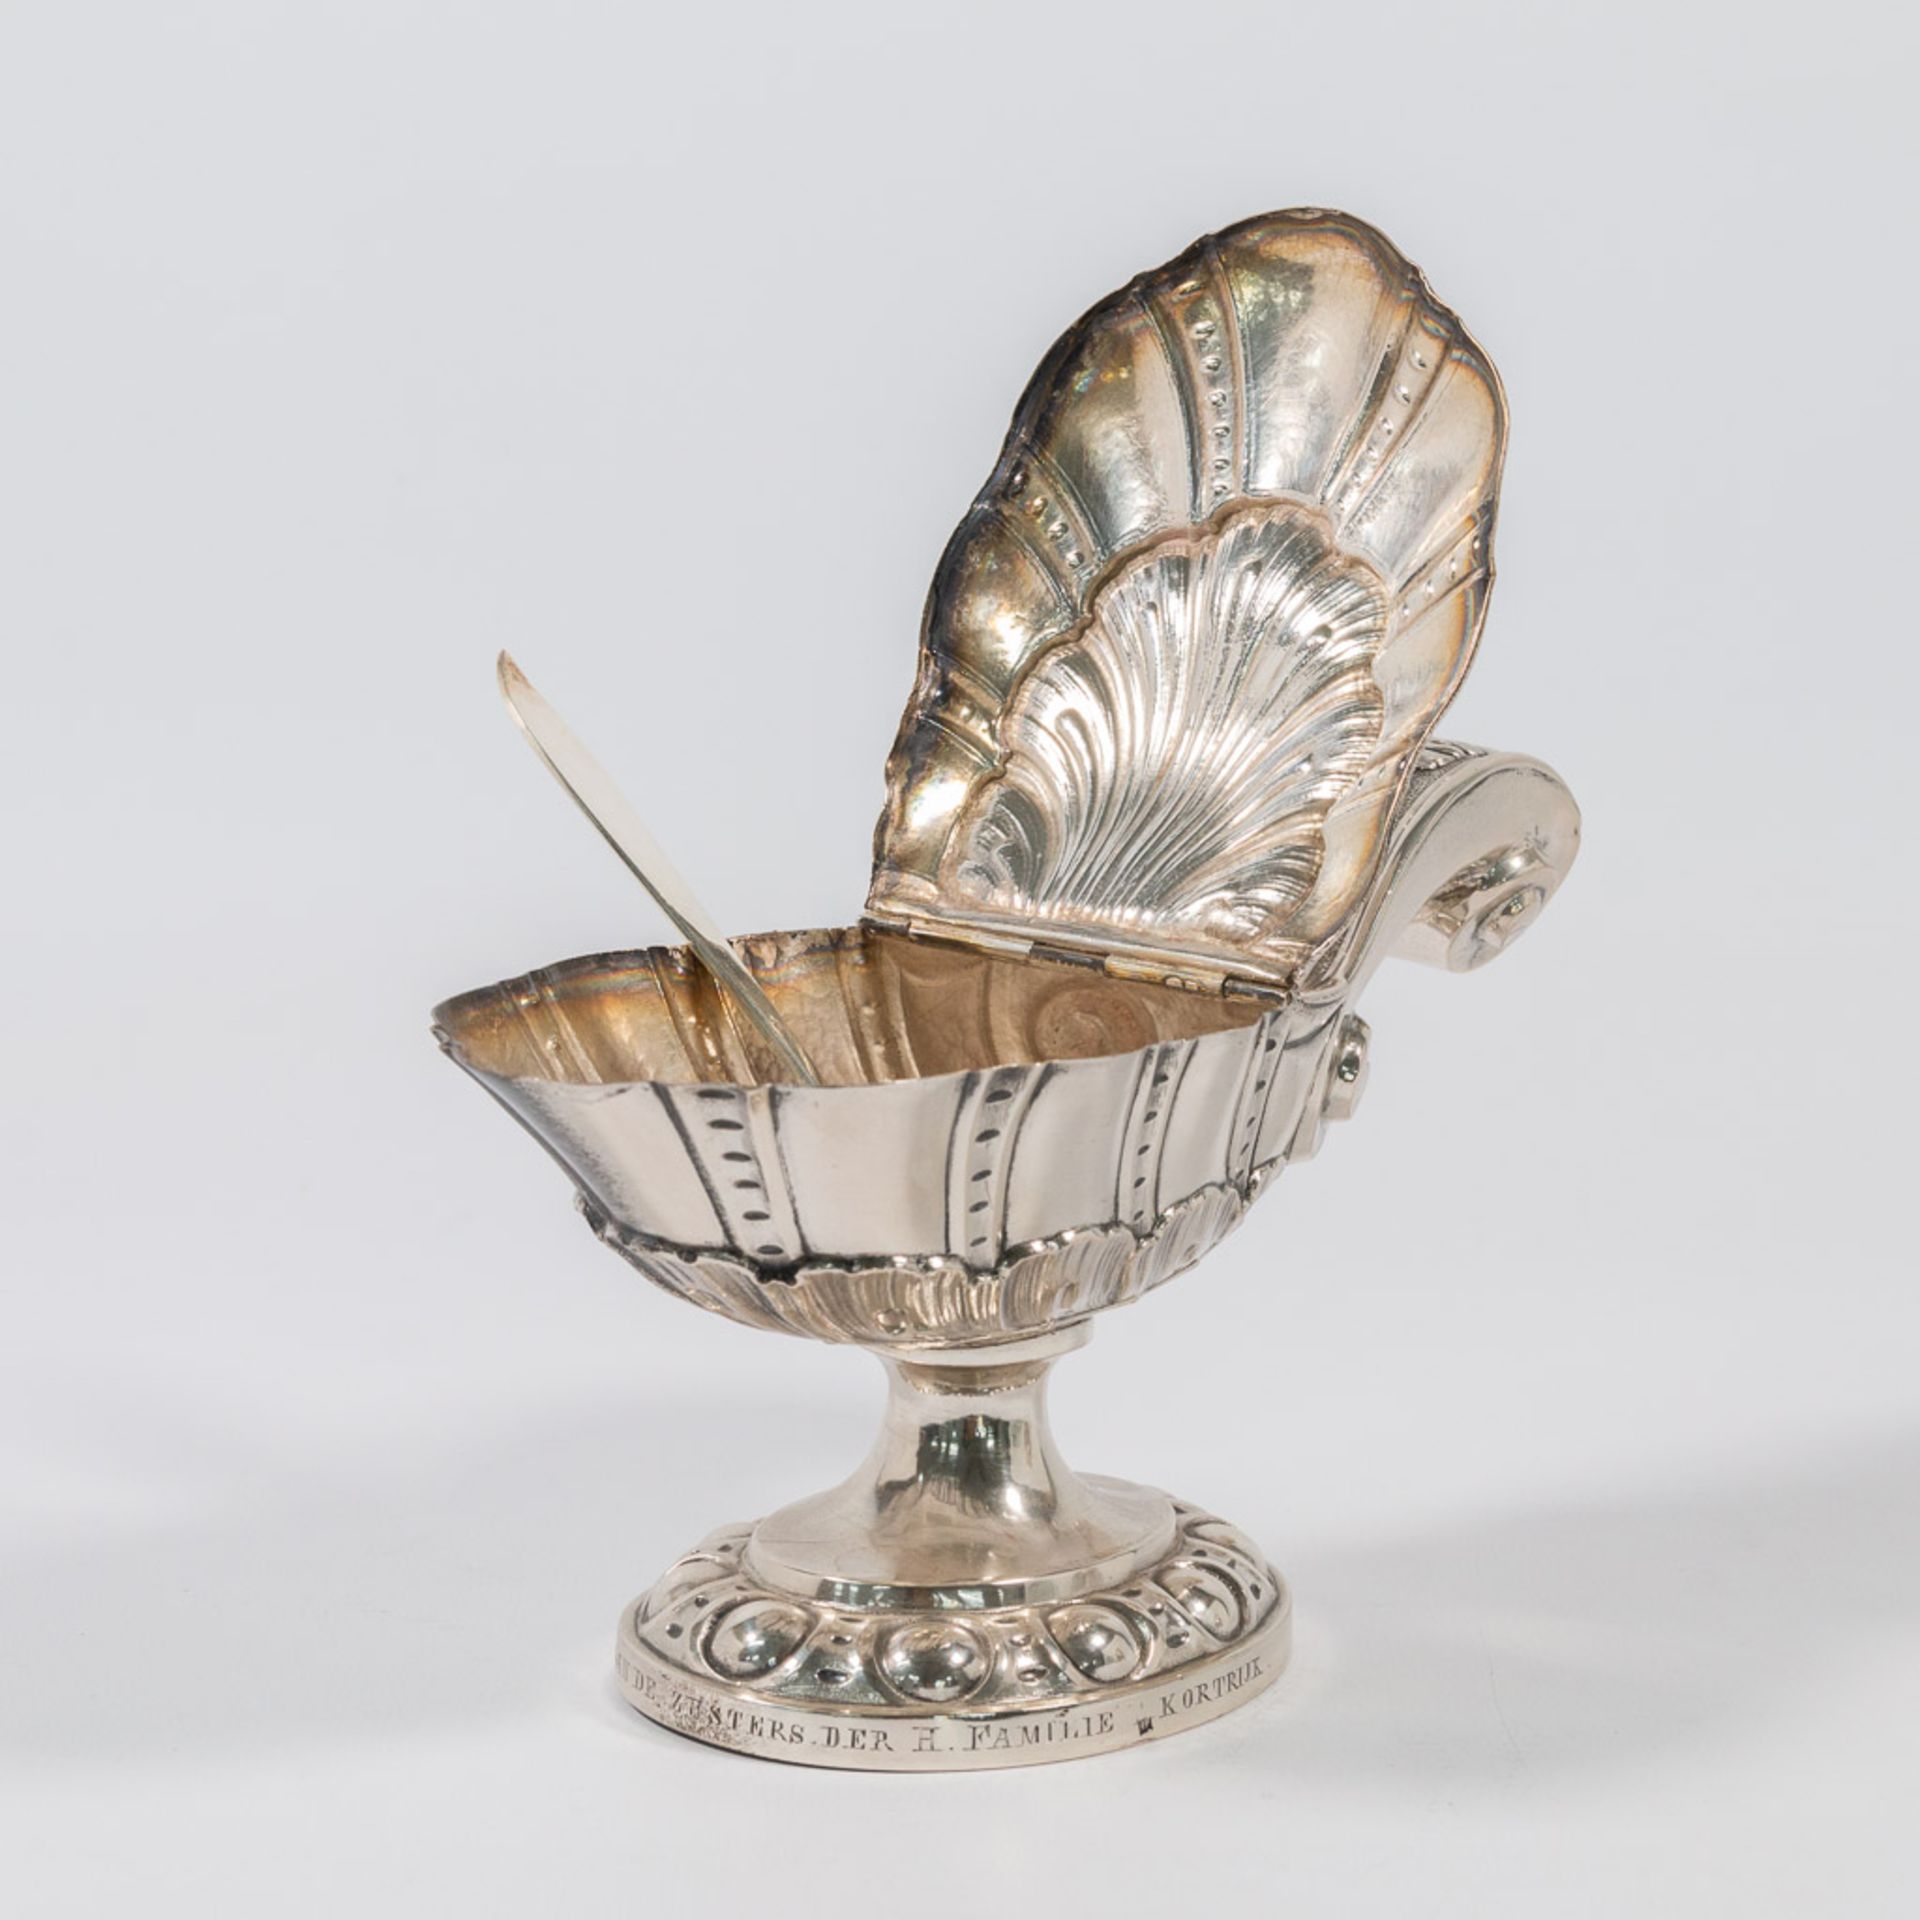 A silver Insence burner and Insence jar. - Image 14 of 39